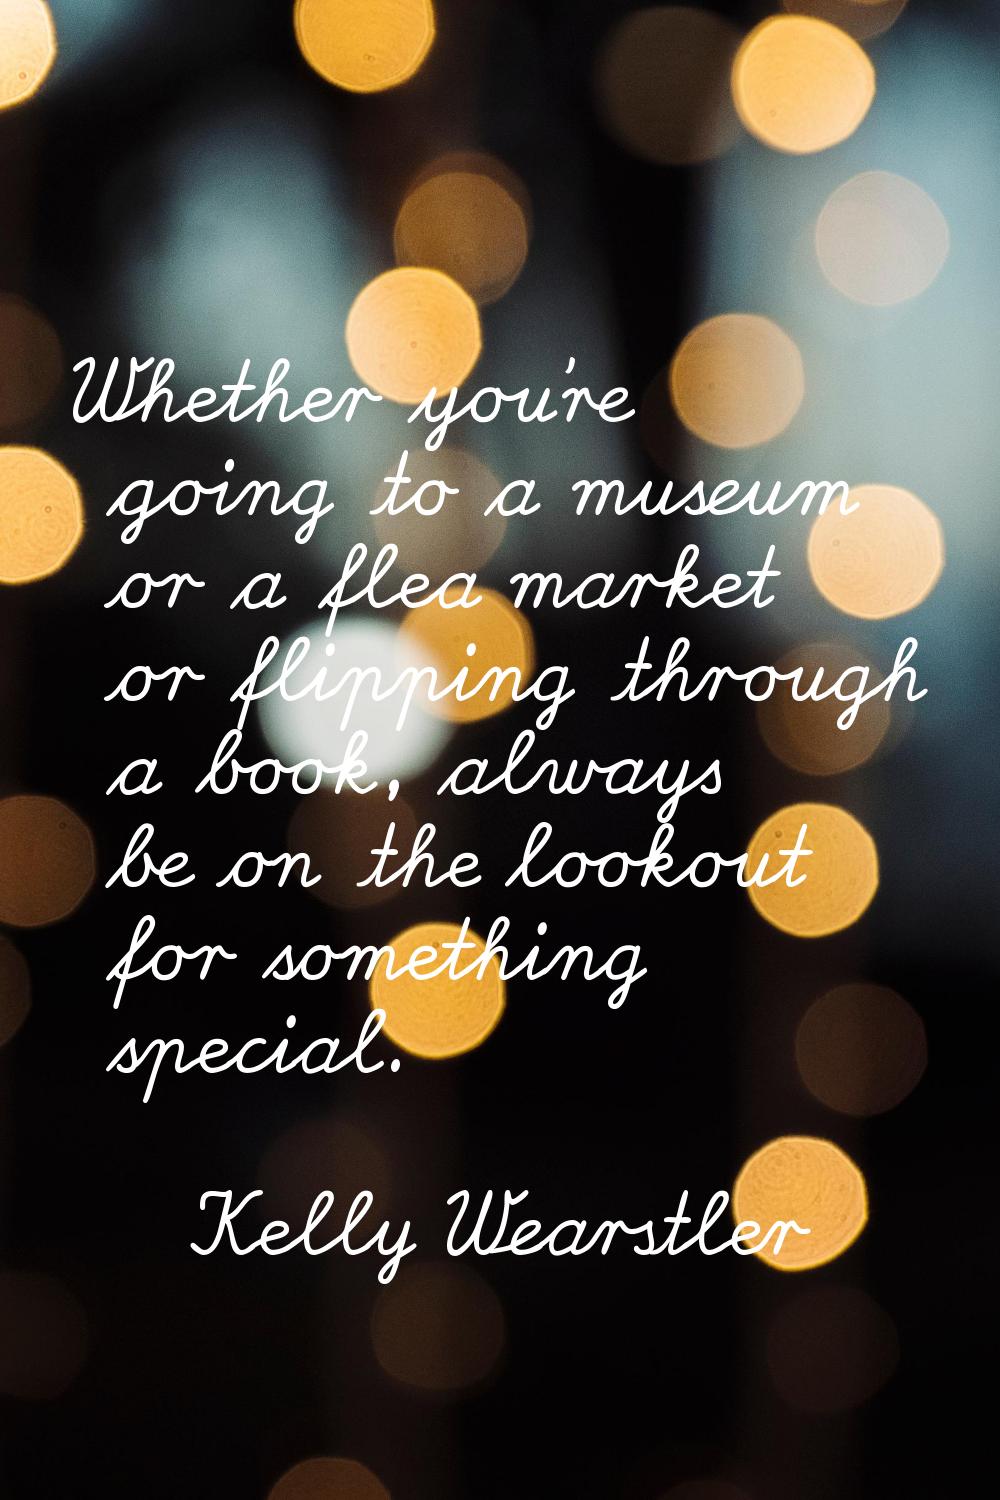 Whether you're going to a museum or a flea market or flipping through a book, always be on the look